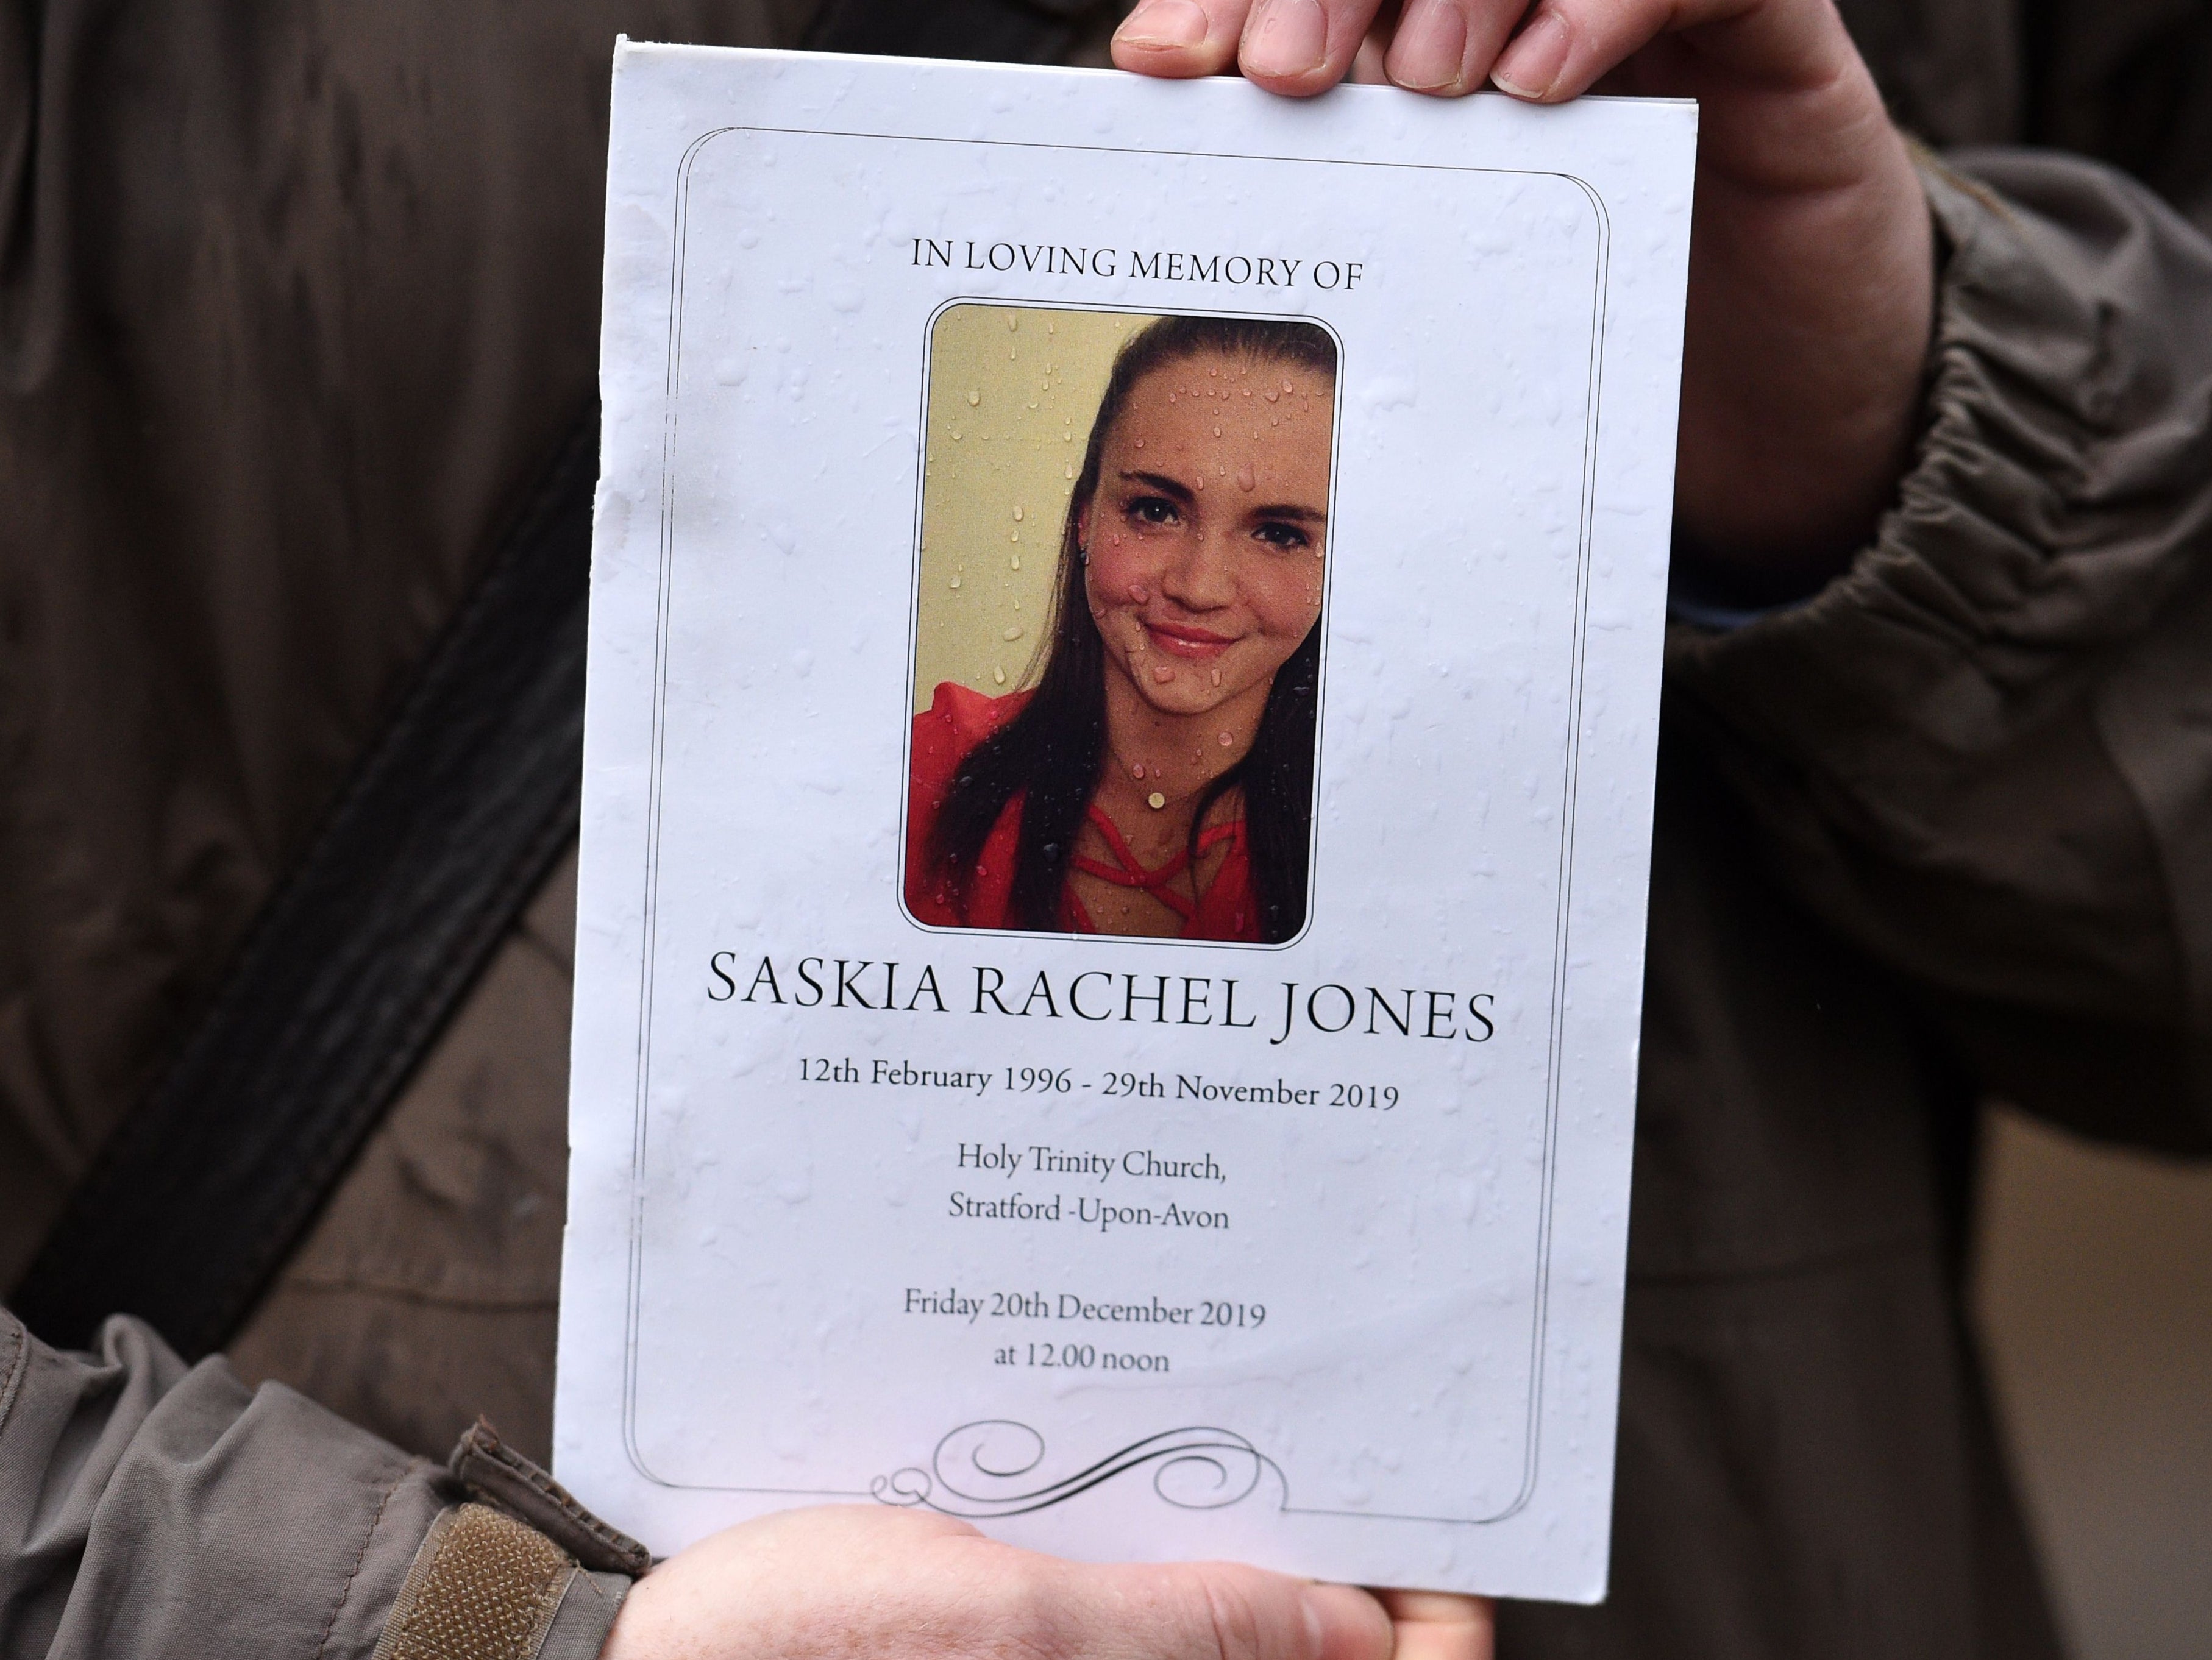 The order of service is pictured for the memorial of Saskia Jones on December 20, 2019